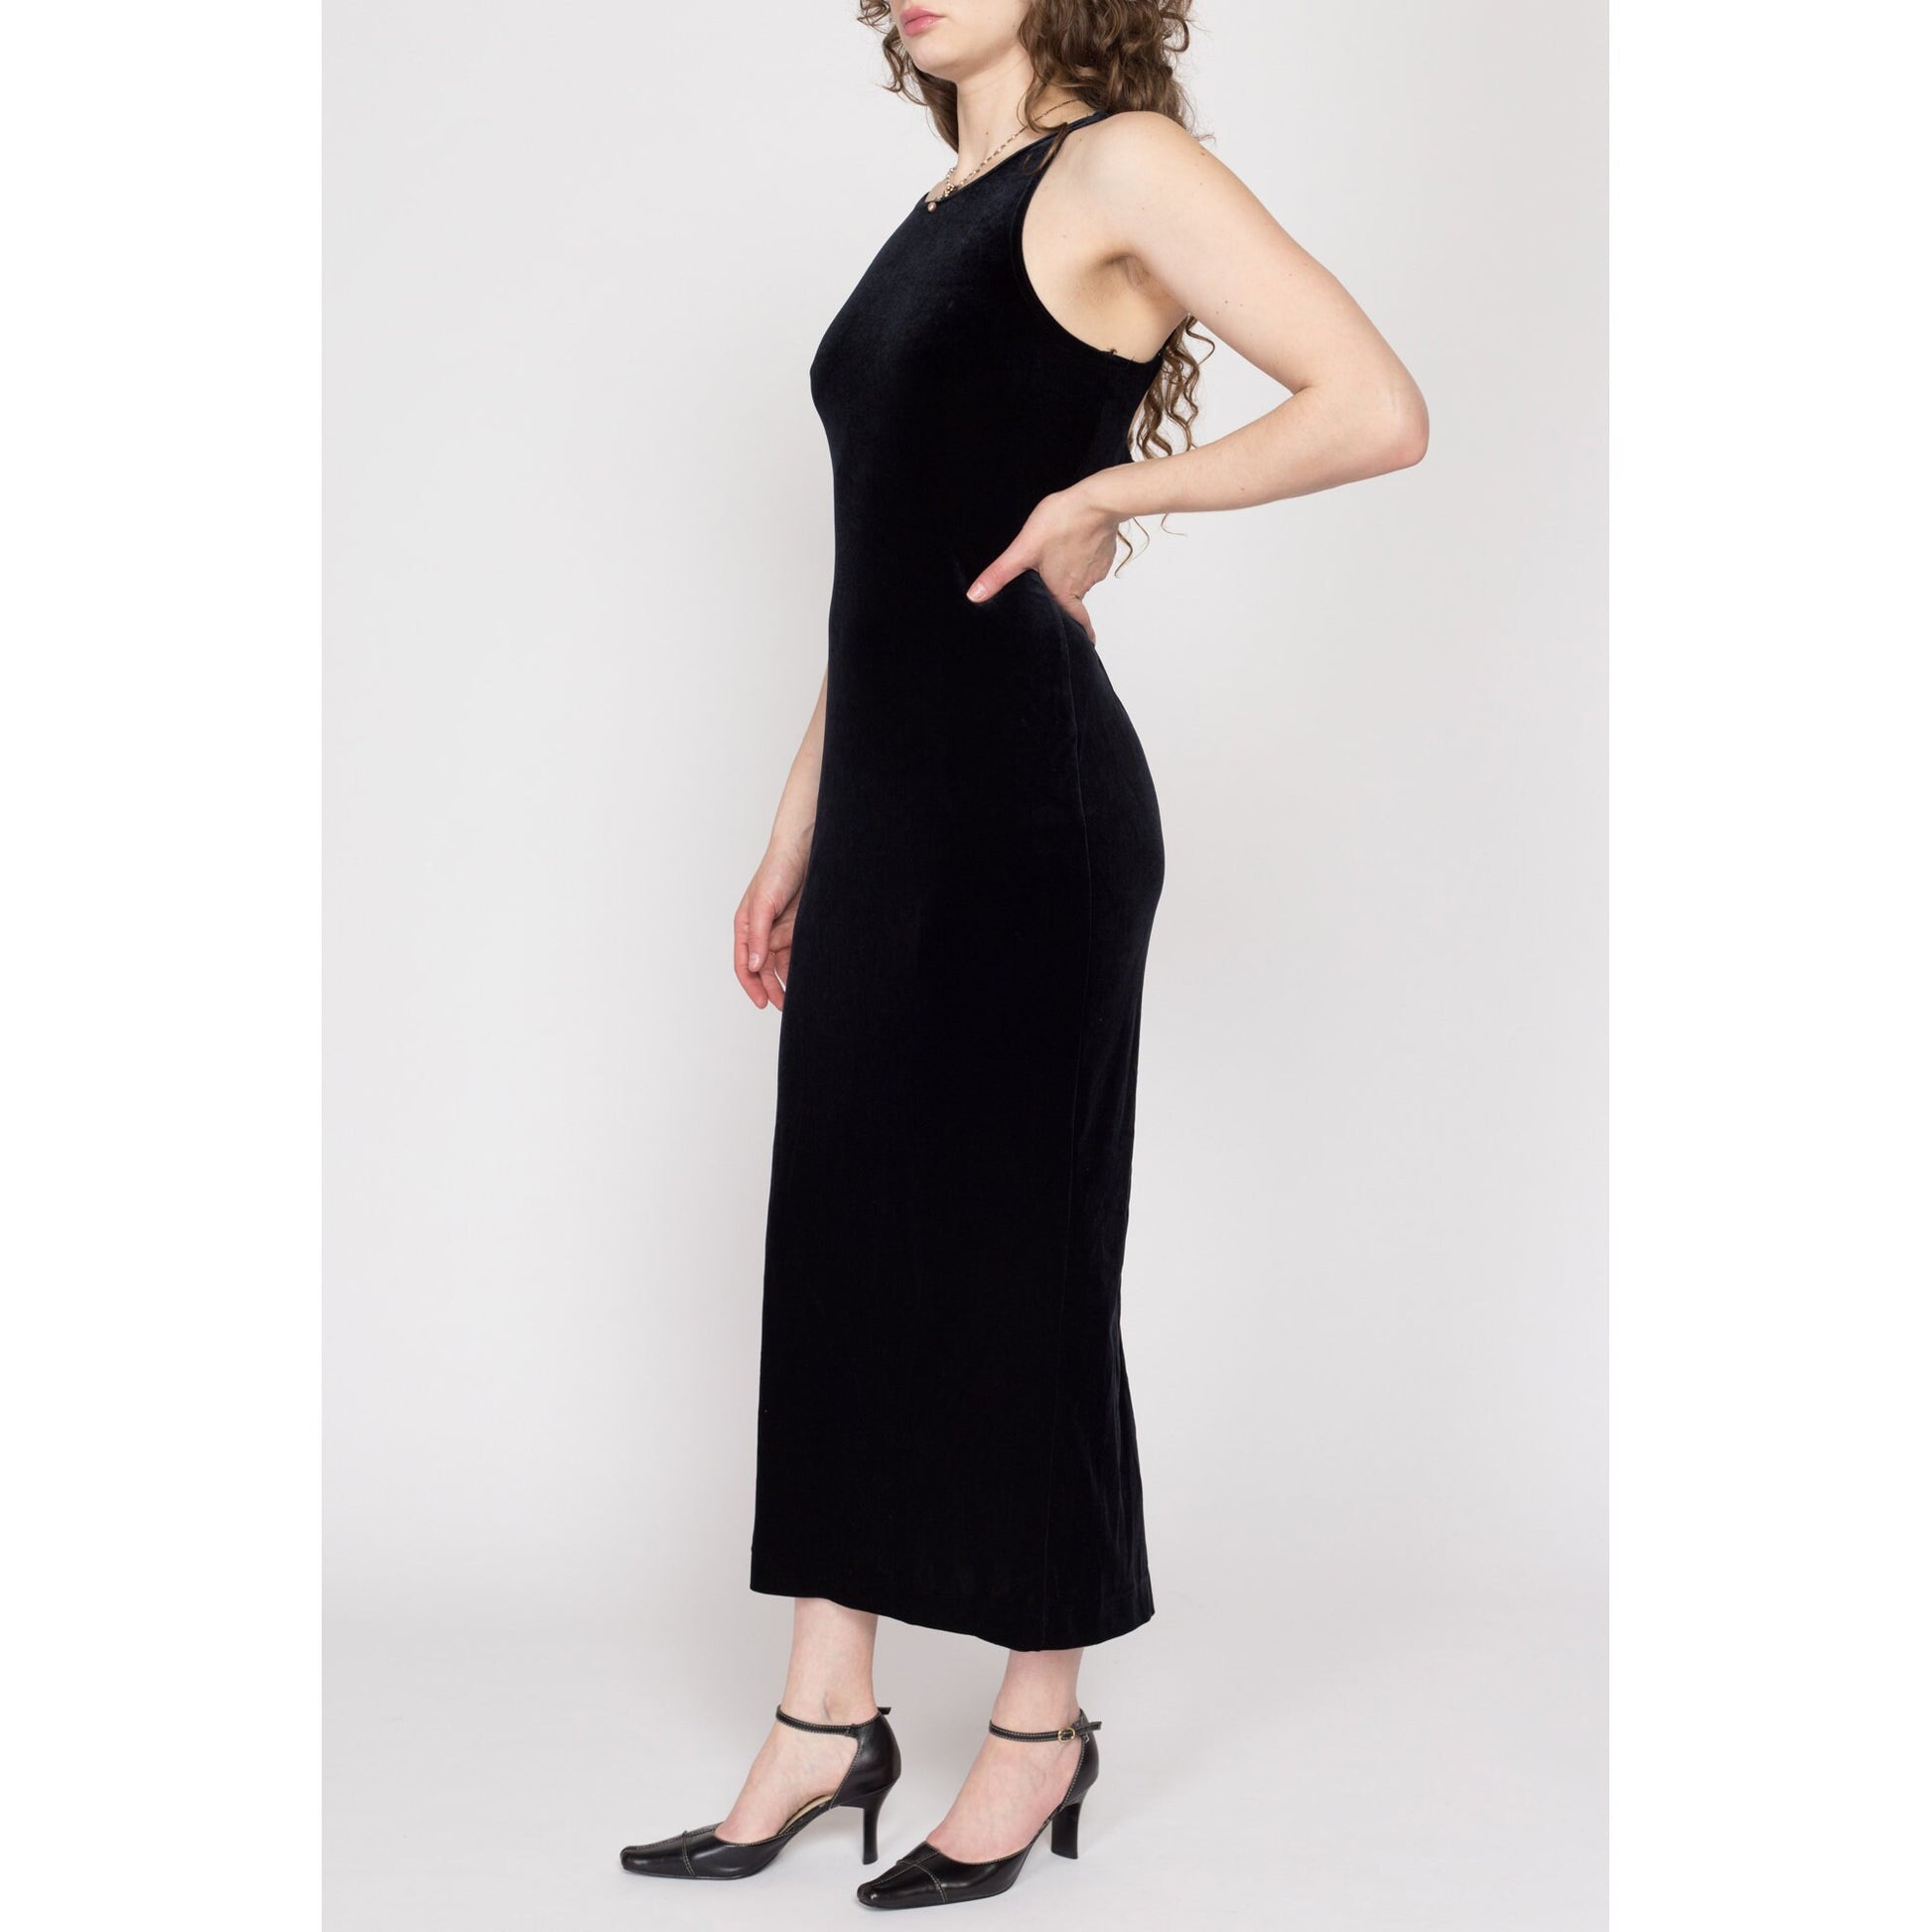 Medium 90s Black Velvet Strappy Open Back Maxi Dress | Vintage Roberta Backless Sexy Fitted Bodycon Party Gown